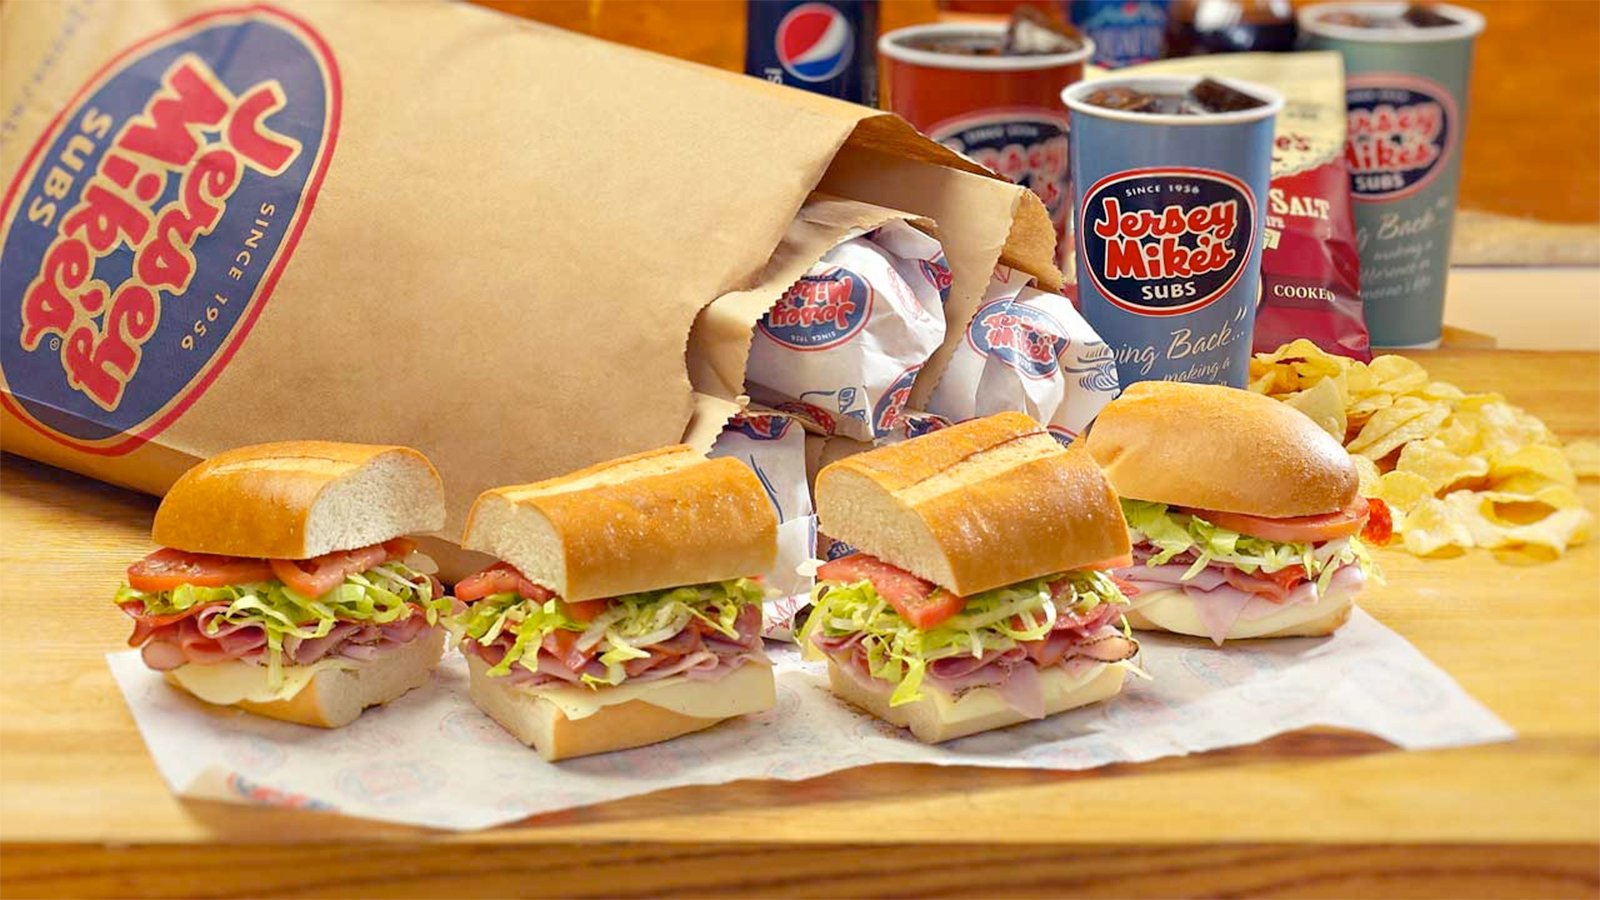 Fundraiser at new Jersey Mike’s in Garden City Park • The Long Island Times